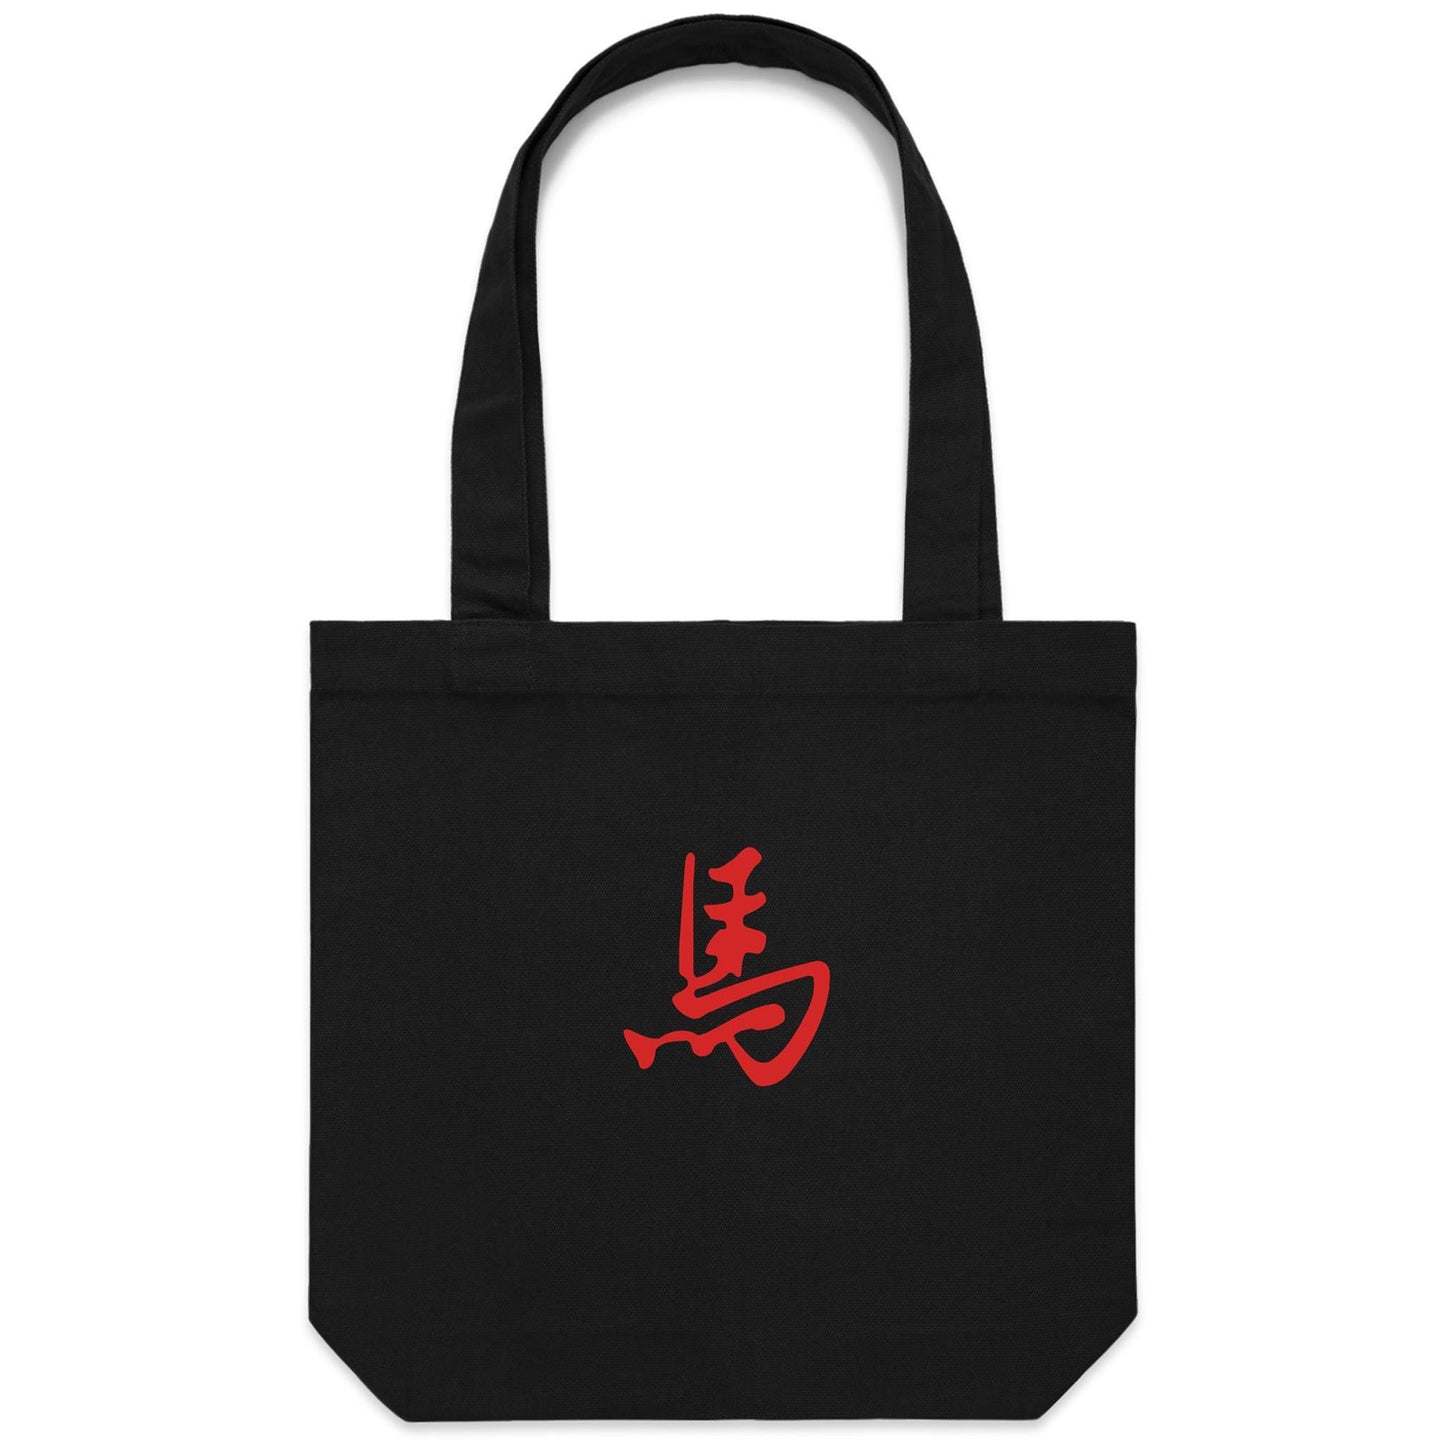 Year of the Horse Canvas Totes